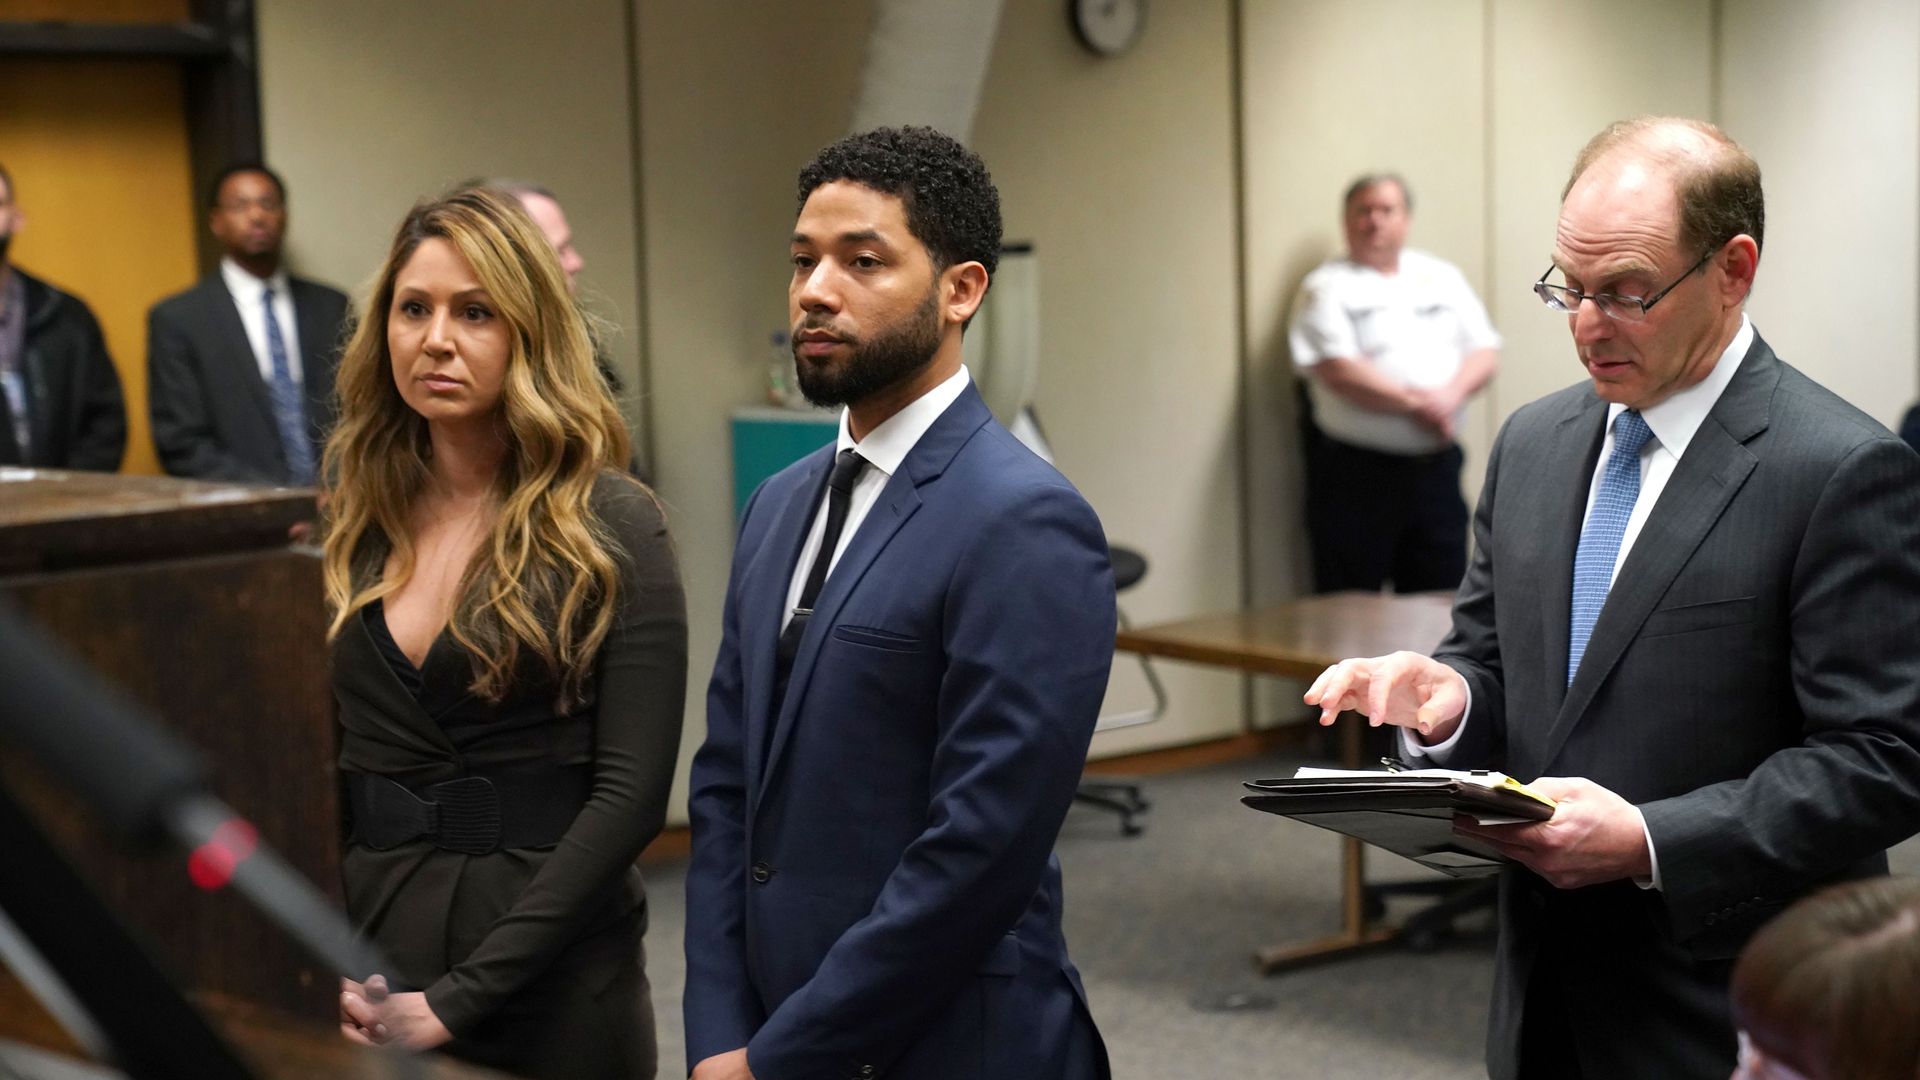 Actor Jussie Smollett with his lawyers